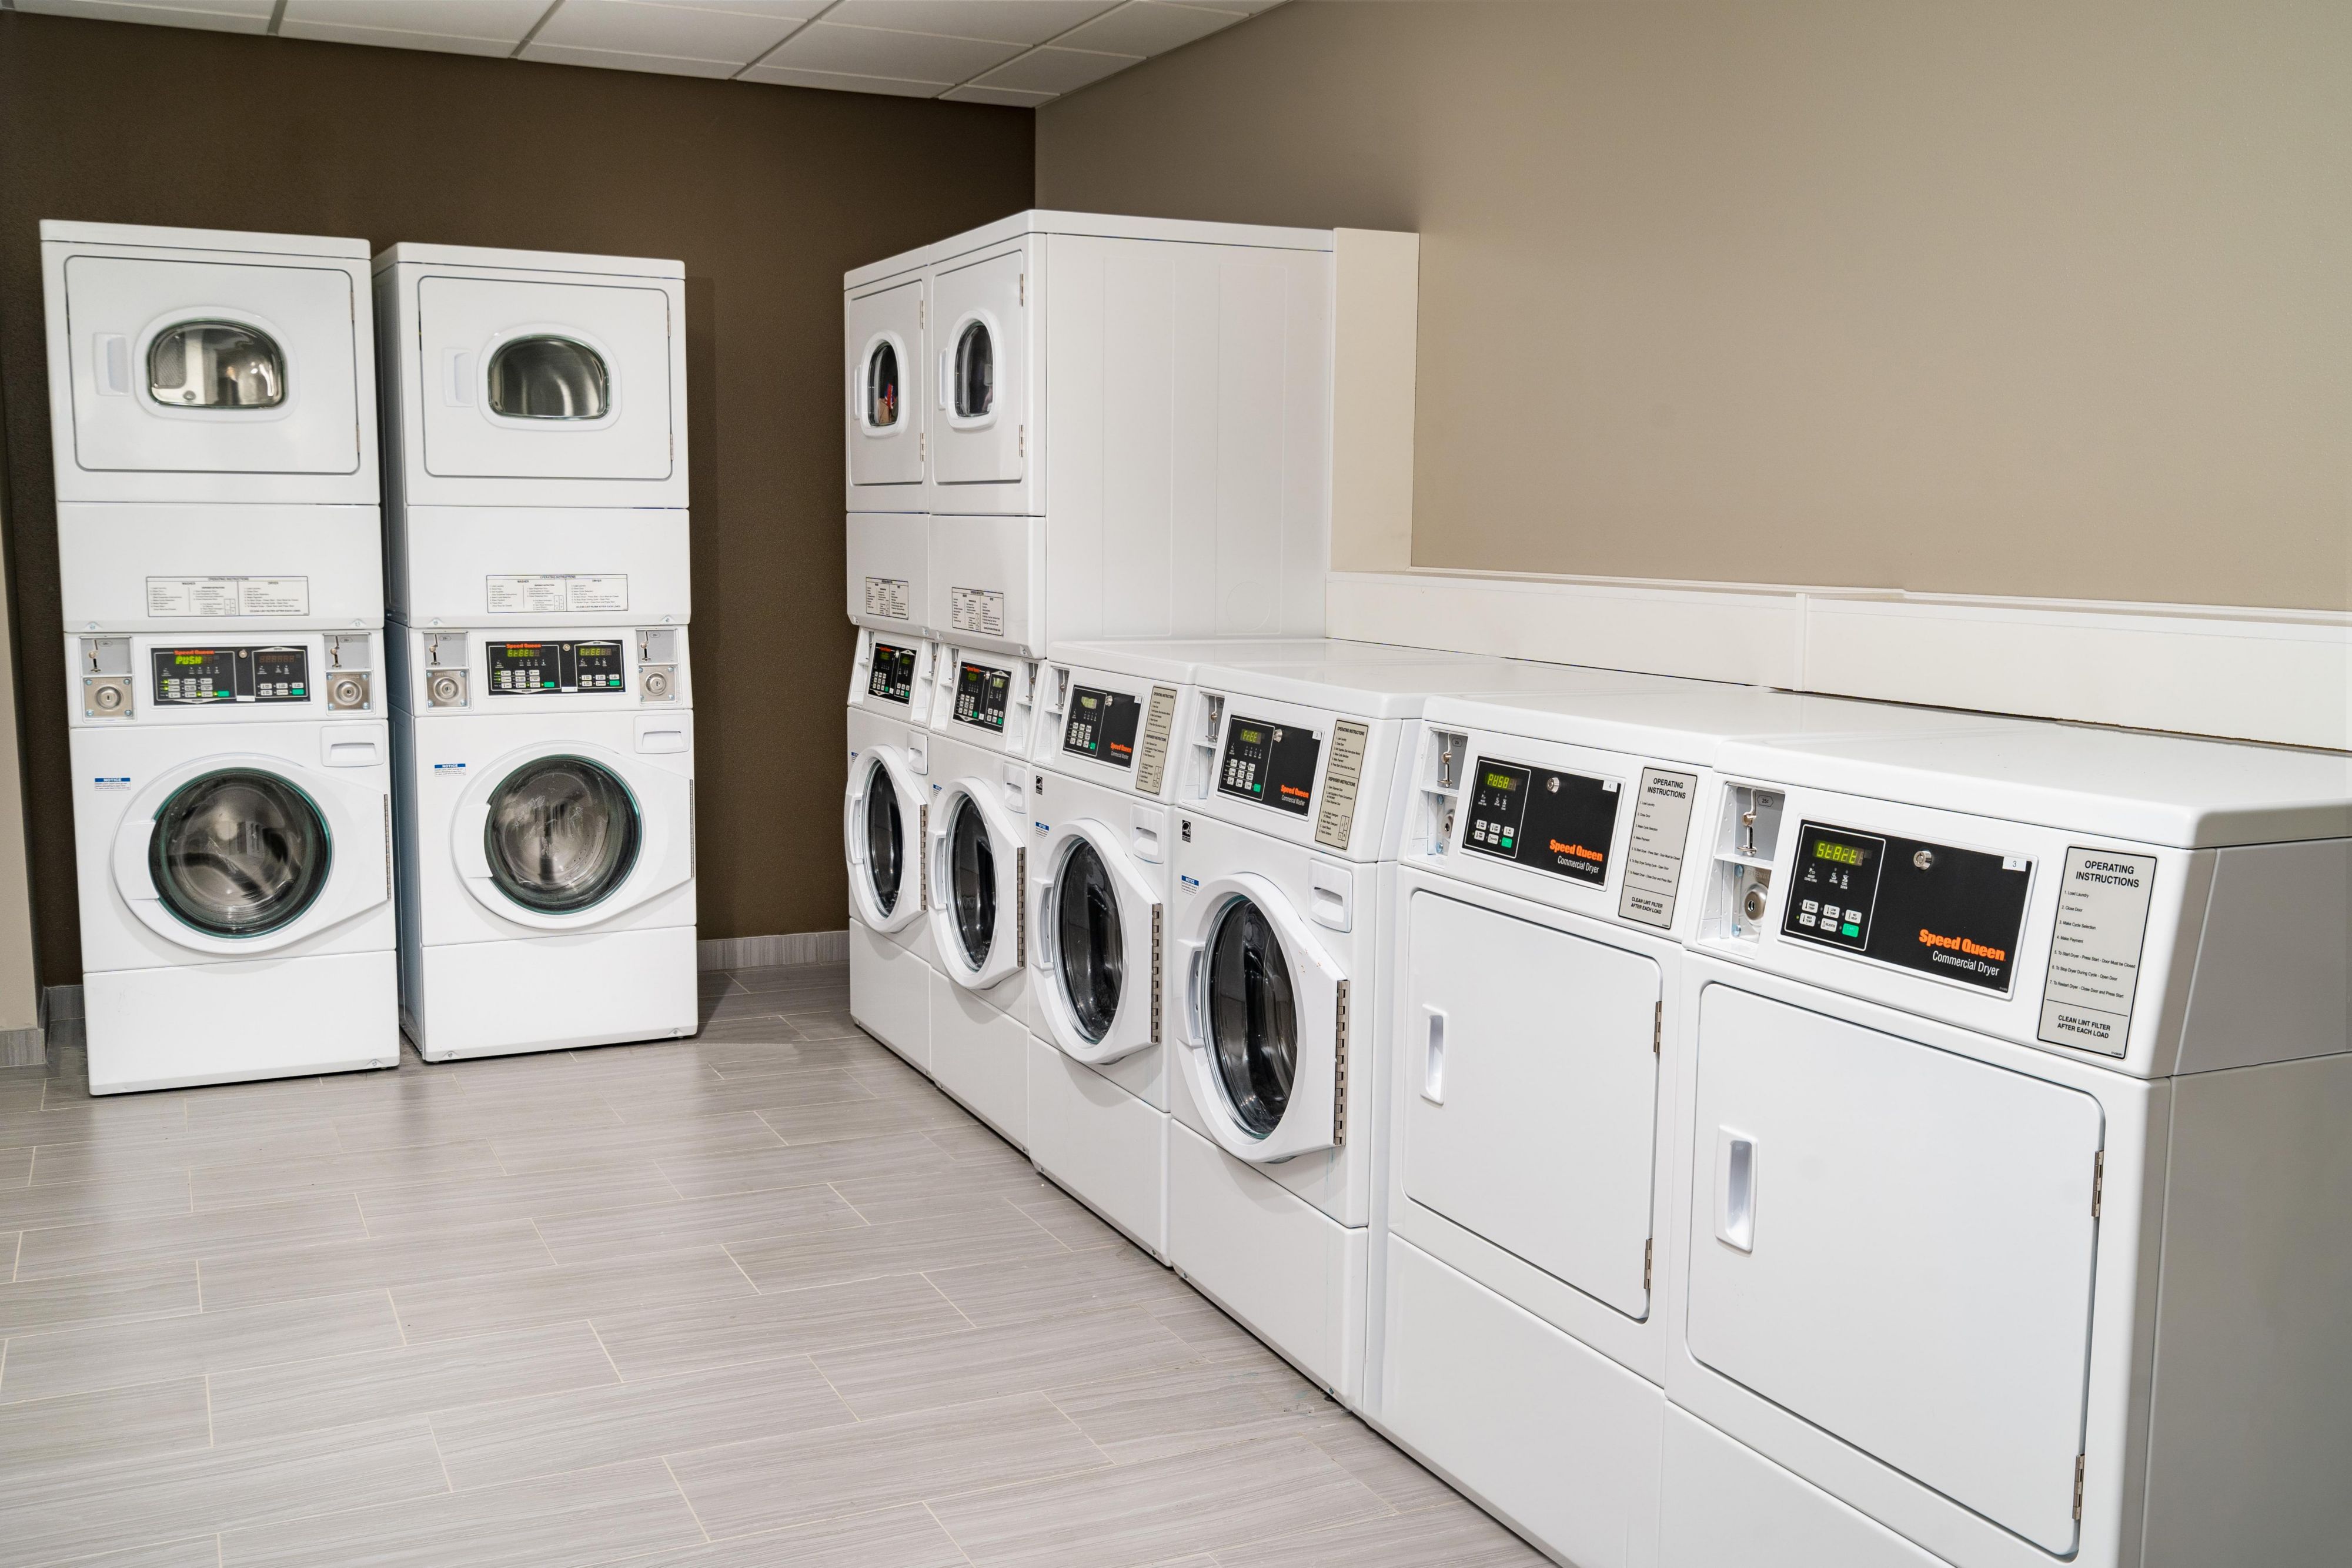 Free On-site Guest self-laundry facility. We also offer dry cleaning/laundry same day services.
